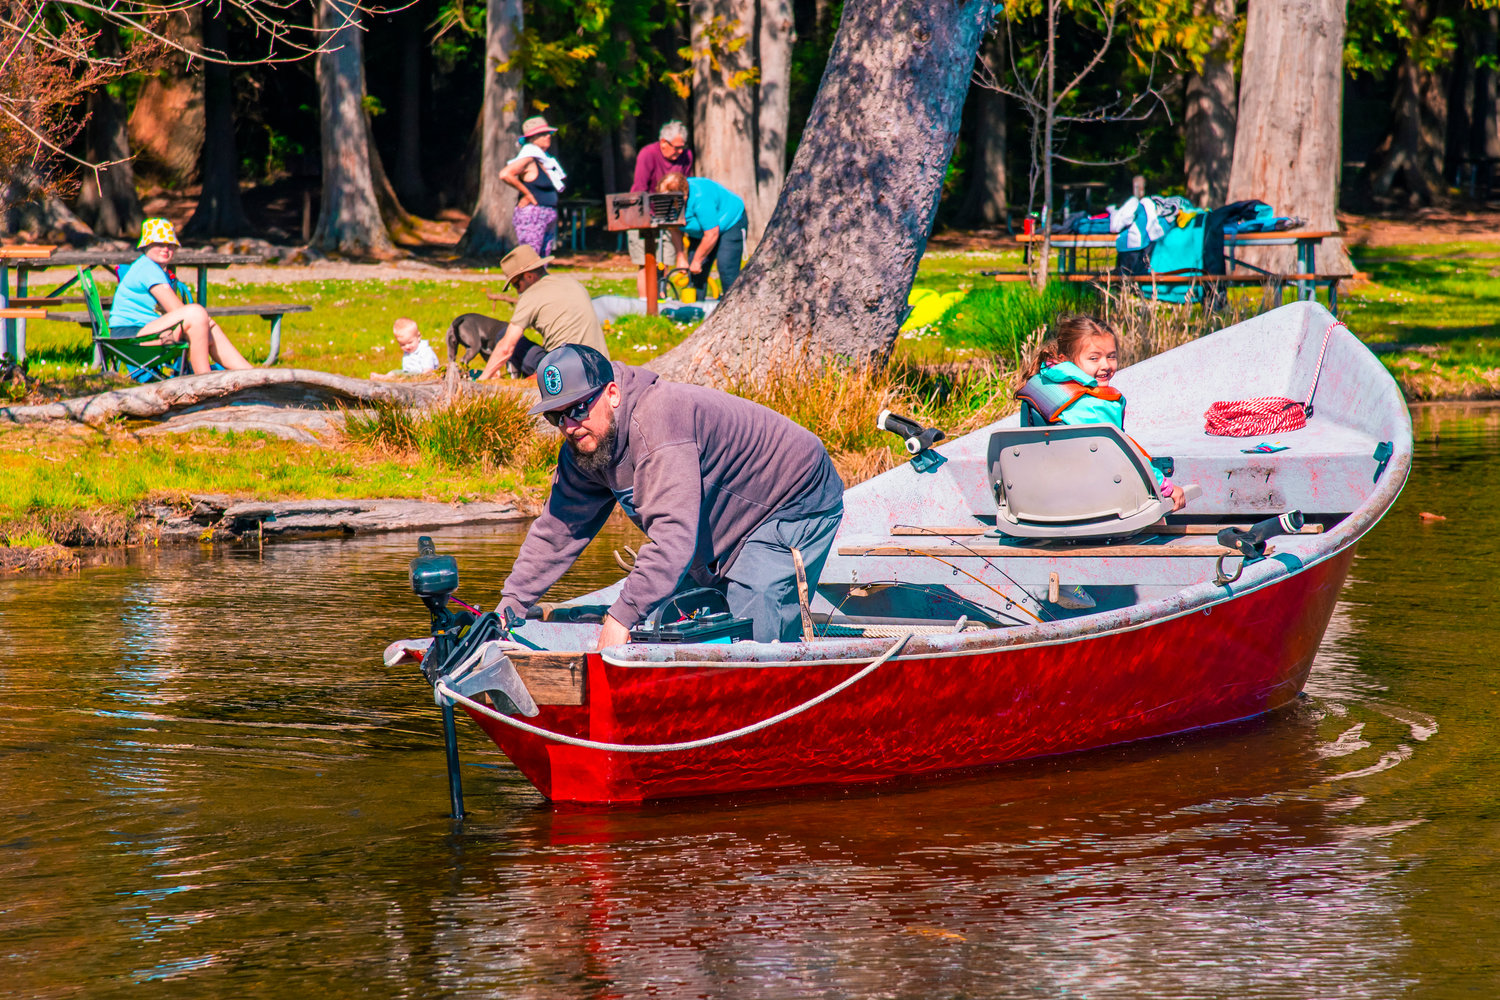 A boat is launched into Deep Lake as families enjoy a sunny day at Millersylvania State Park earlier this year.